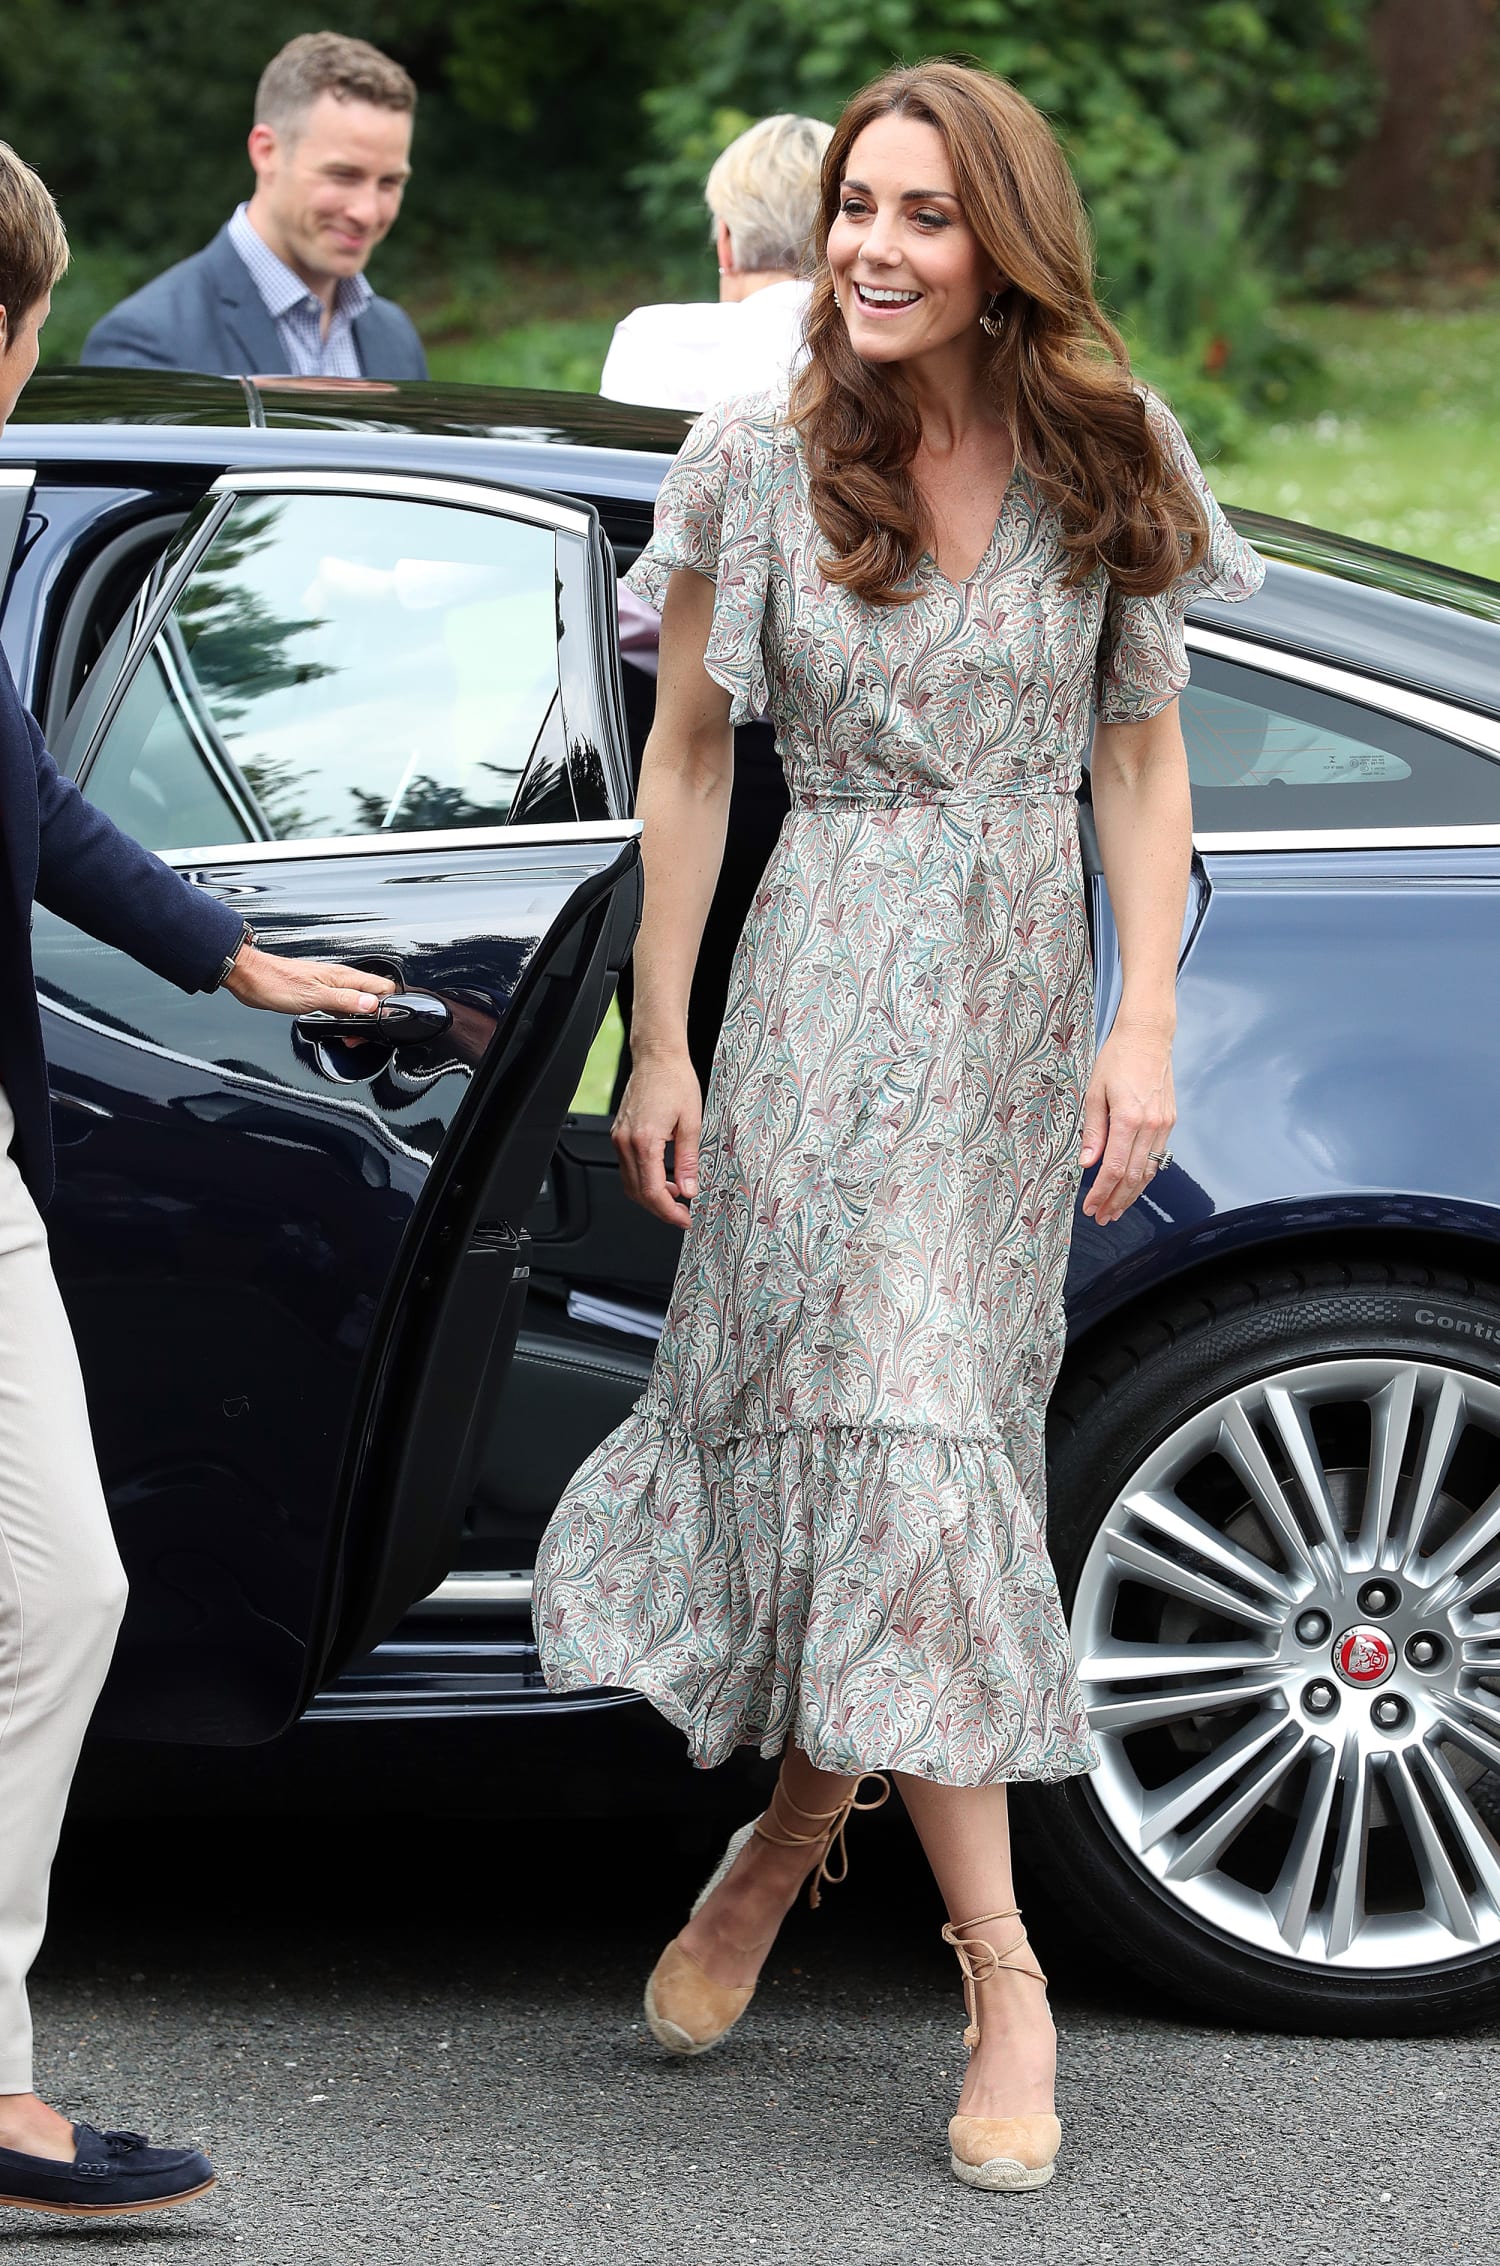 Kate Middleton Just Wore Another Pair of Castañer Espadrilles